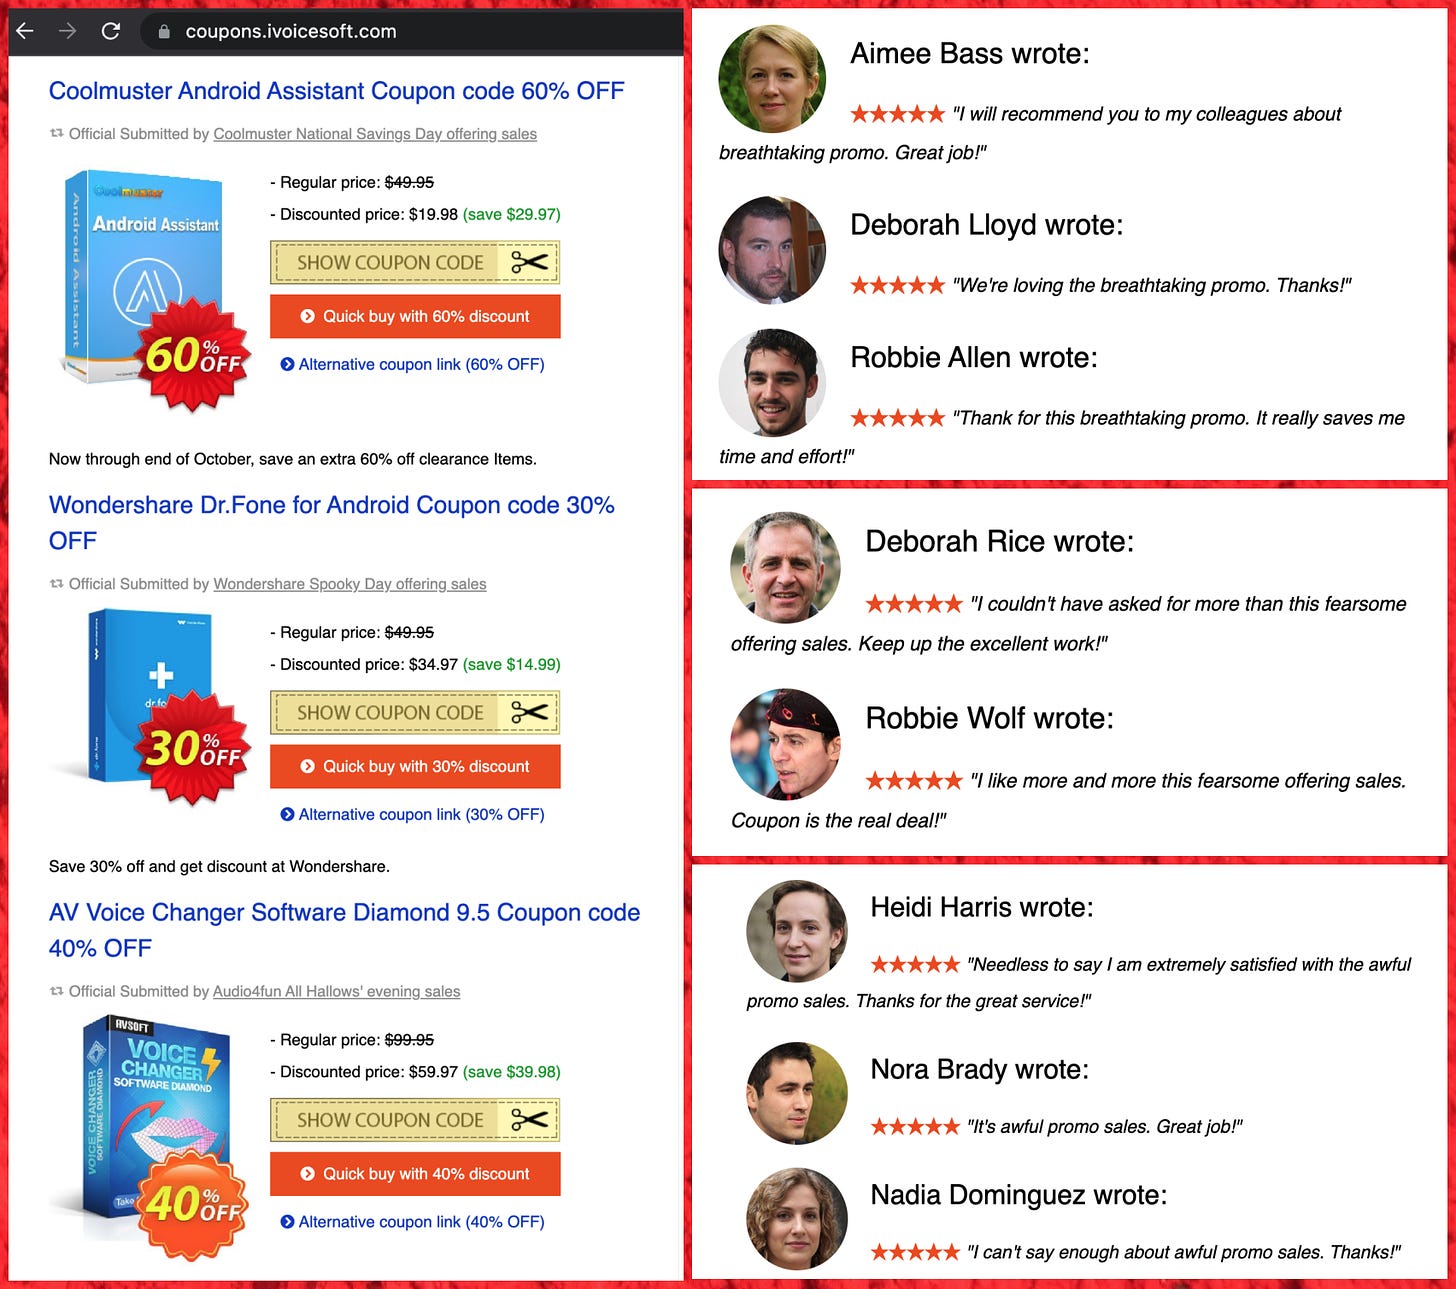 collage of discount offers from coupons.ivoicesoft.com and alleged customer reviews